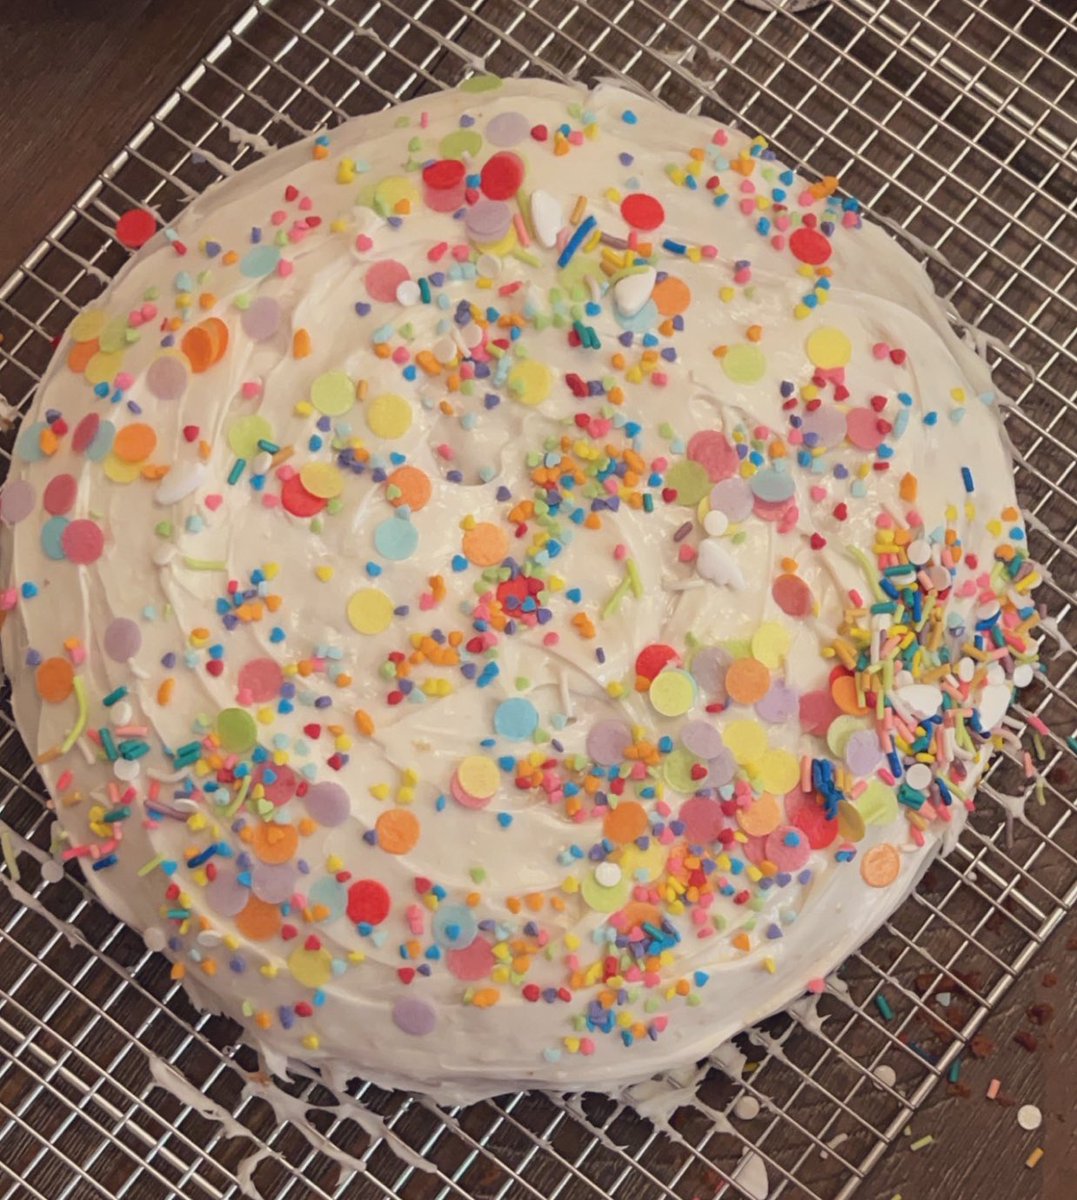 i did it the aesthetic i was going for was rainbow barf sprinkle